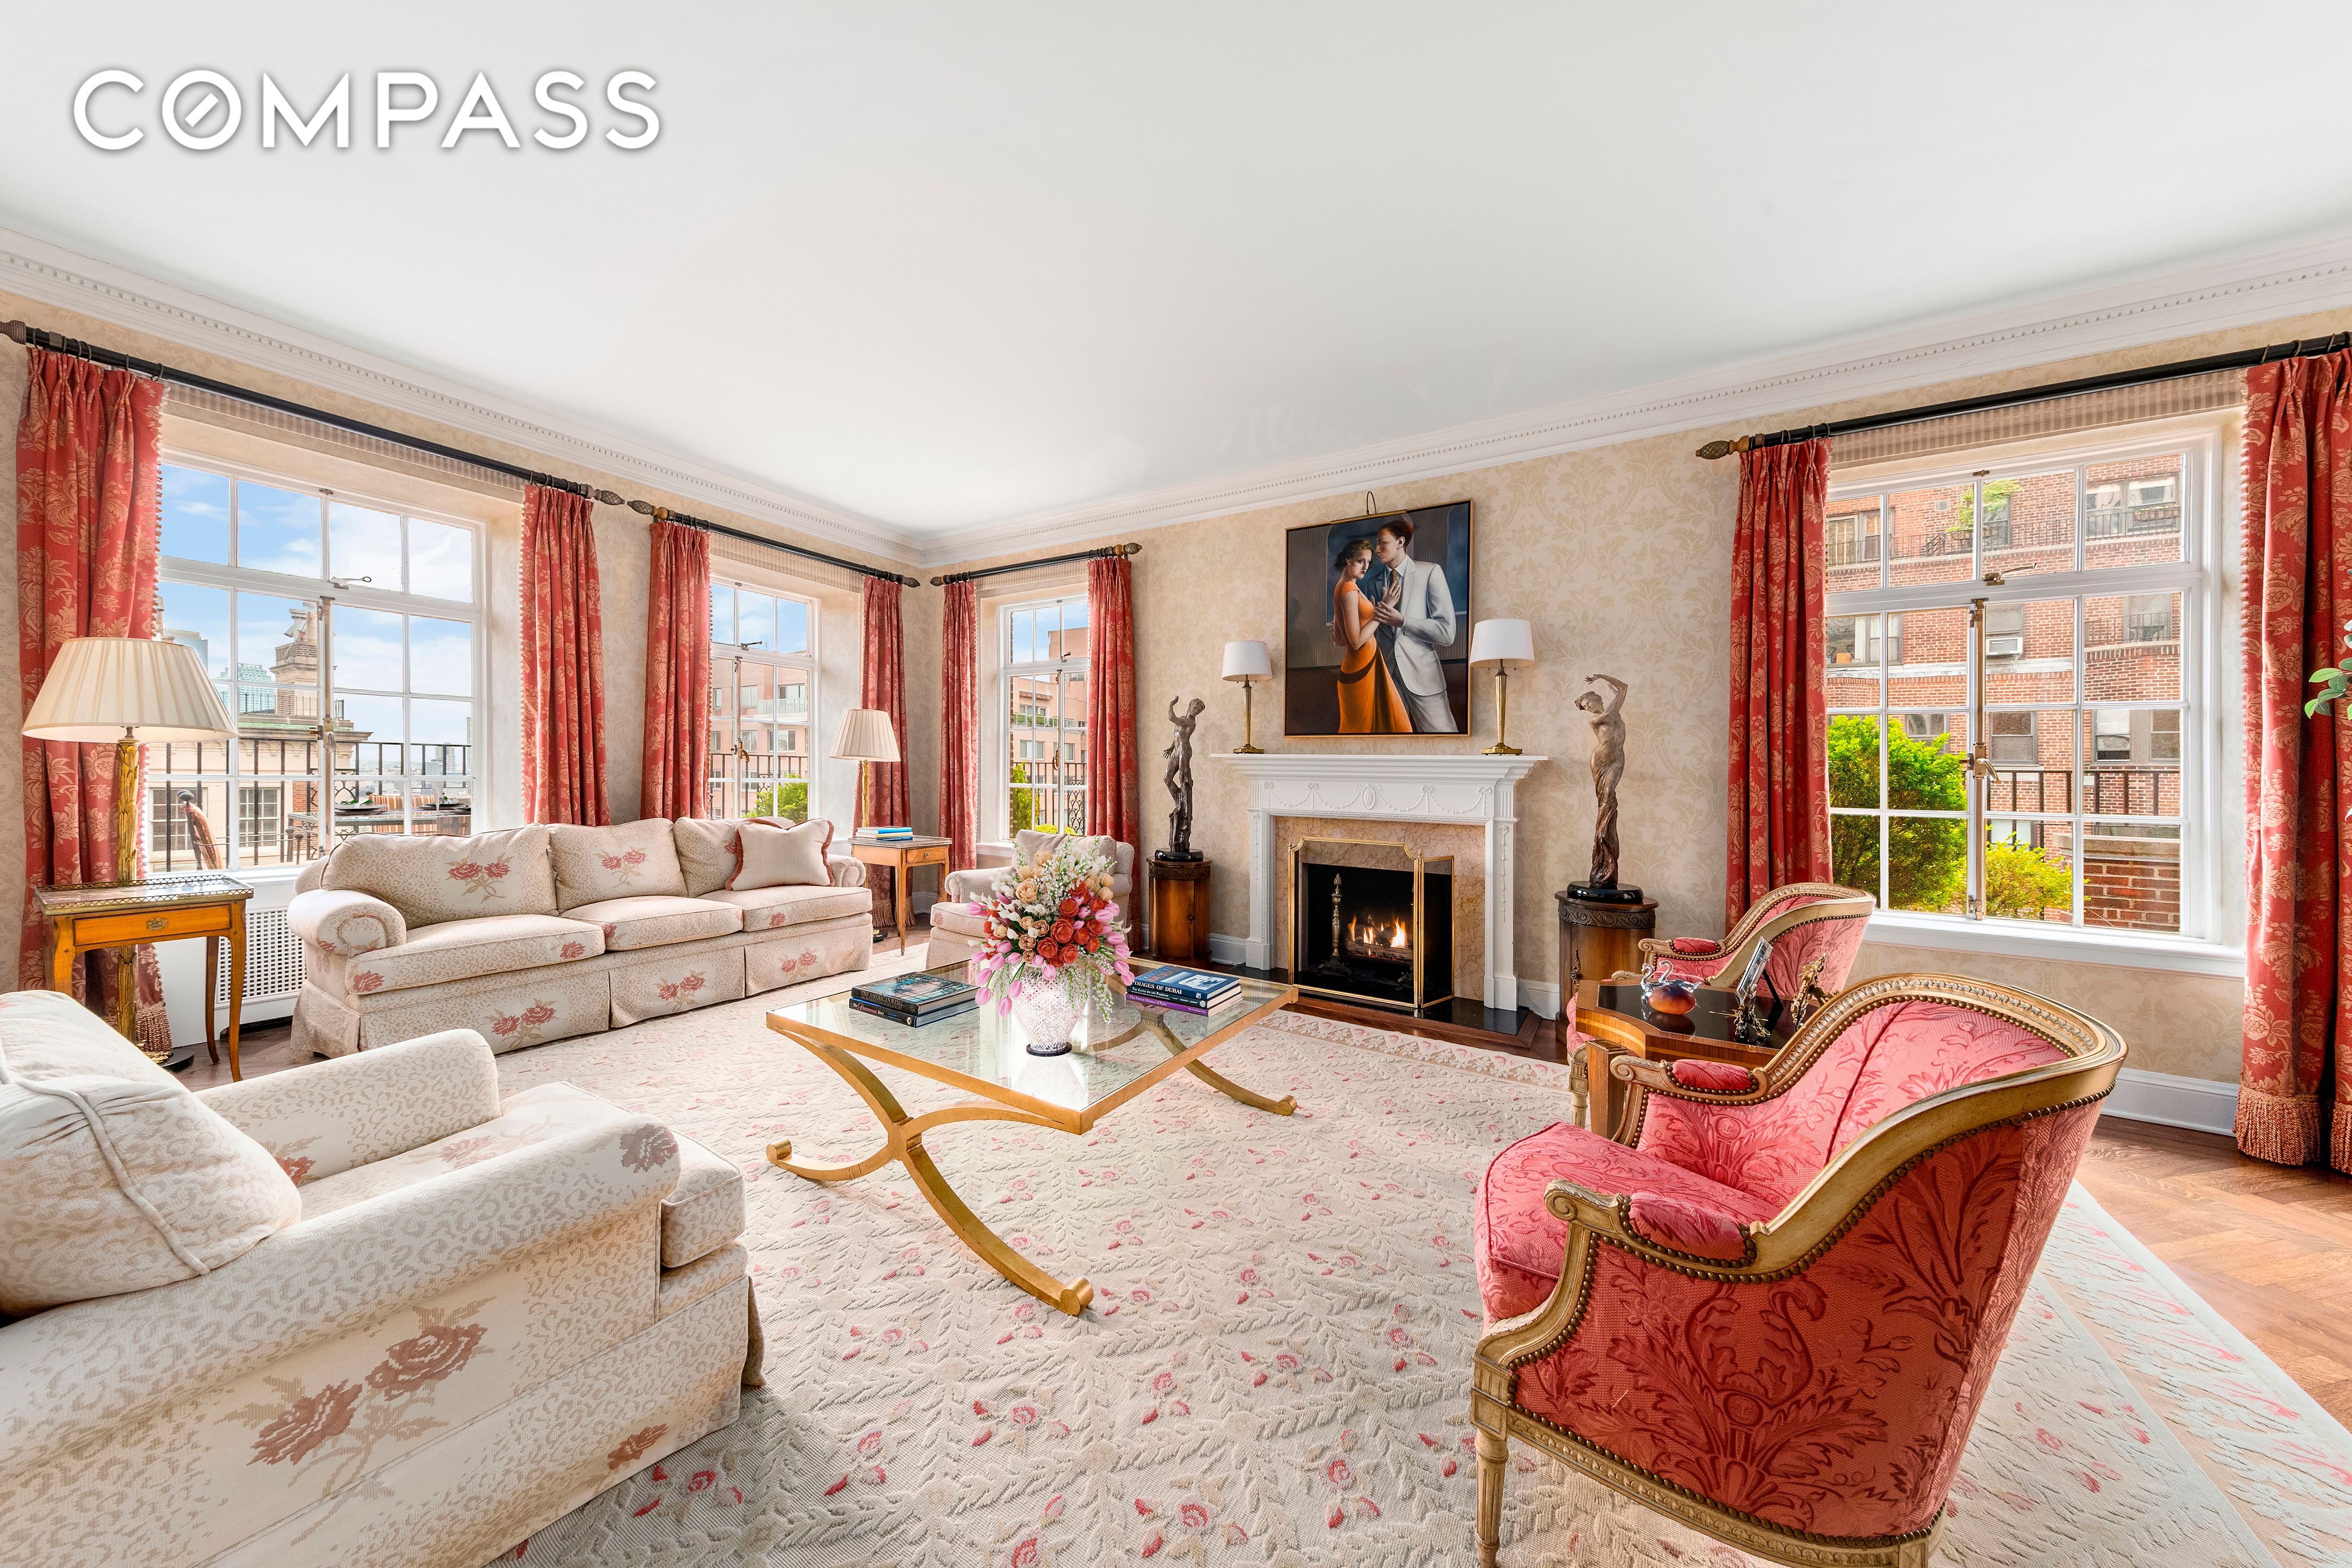 14 Sutton Place Pha, Midtown East, Midtown East, NYC - 4 Bedrooms  
4.5 Bathrooms  
8 Rooms - 